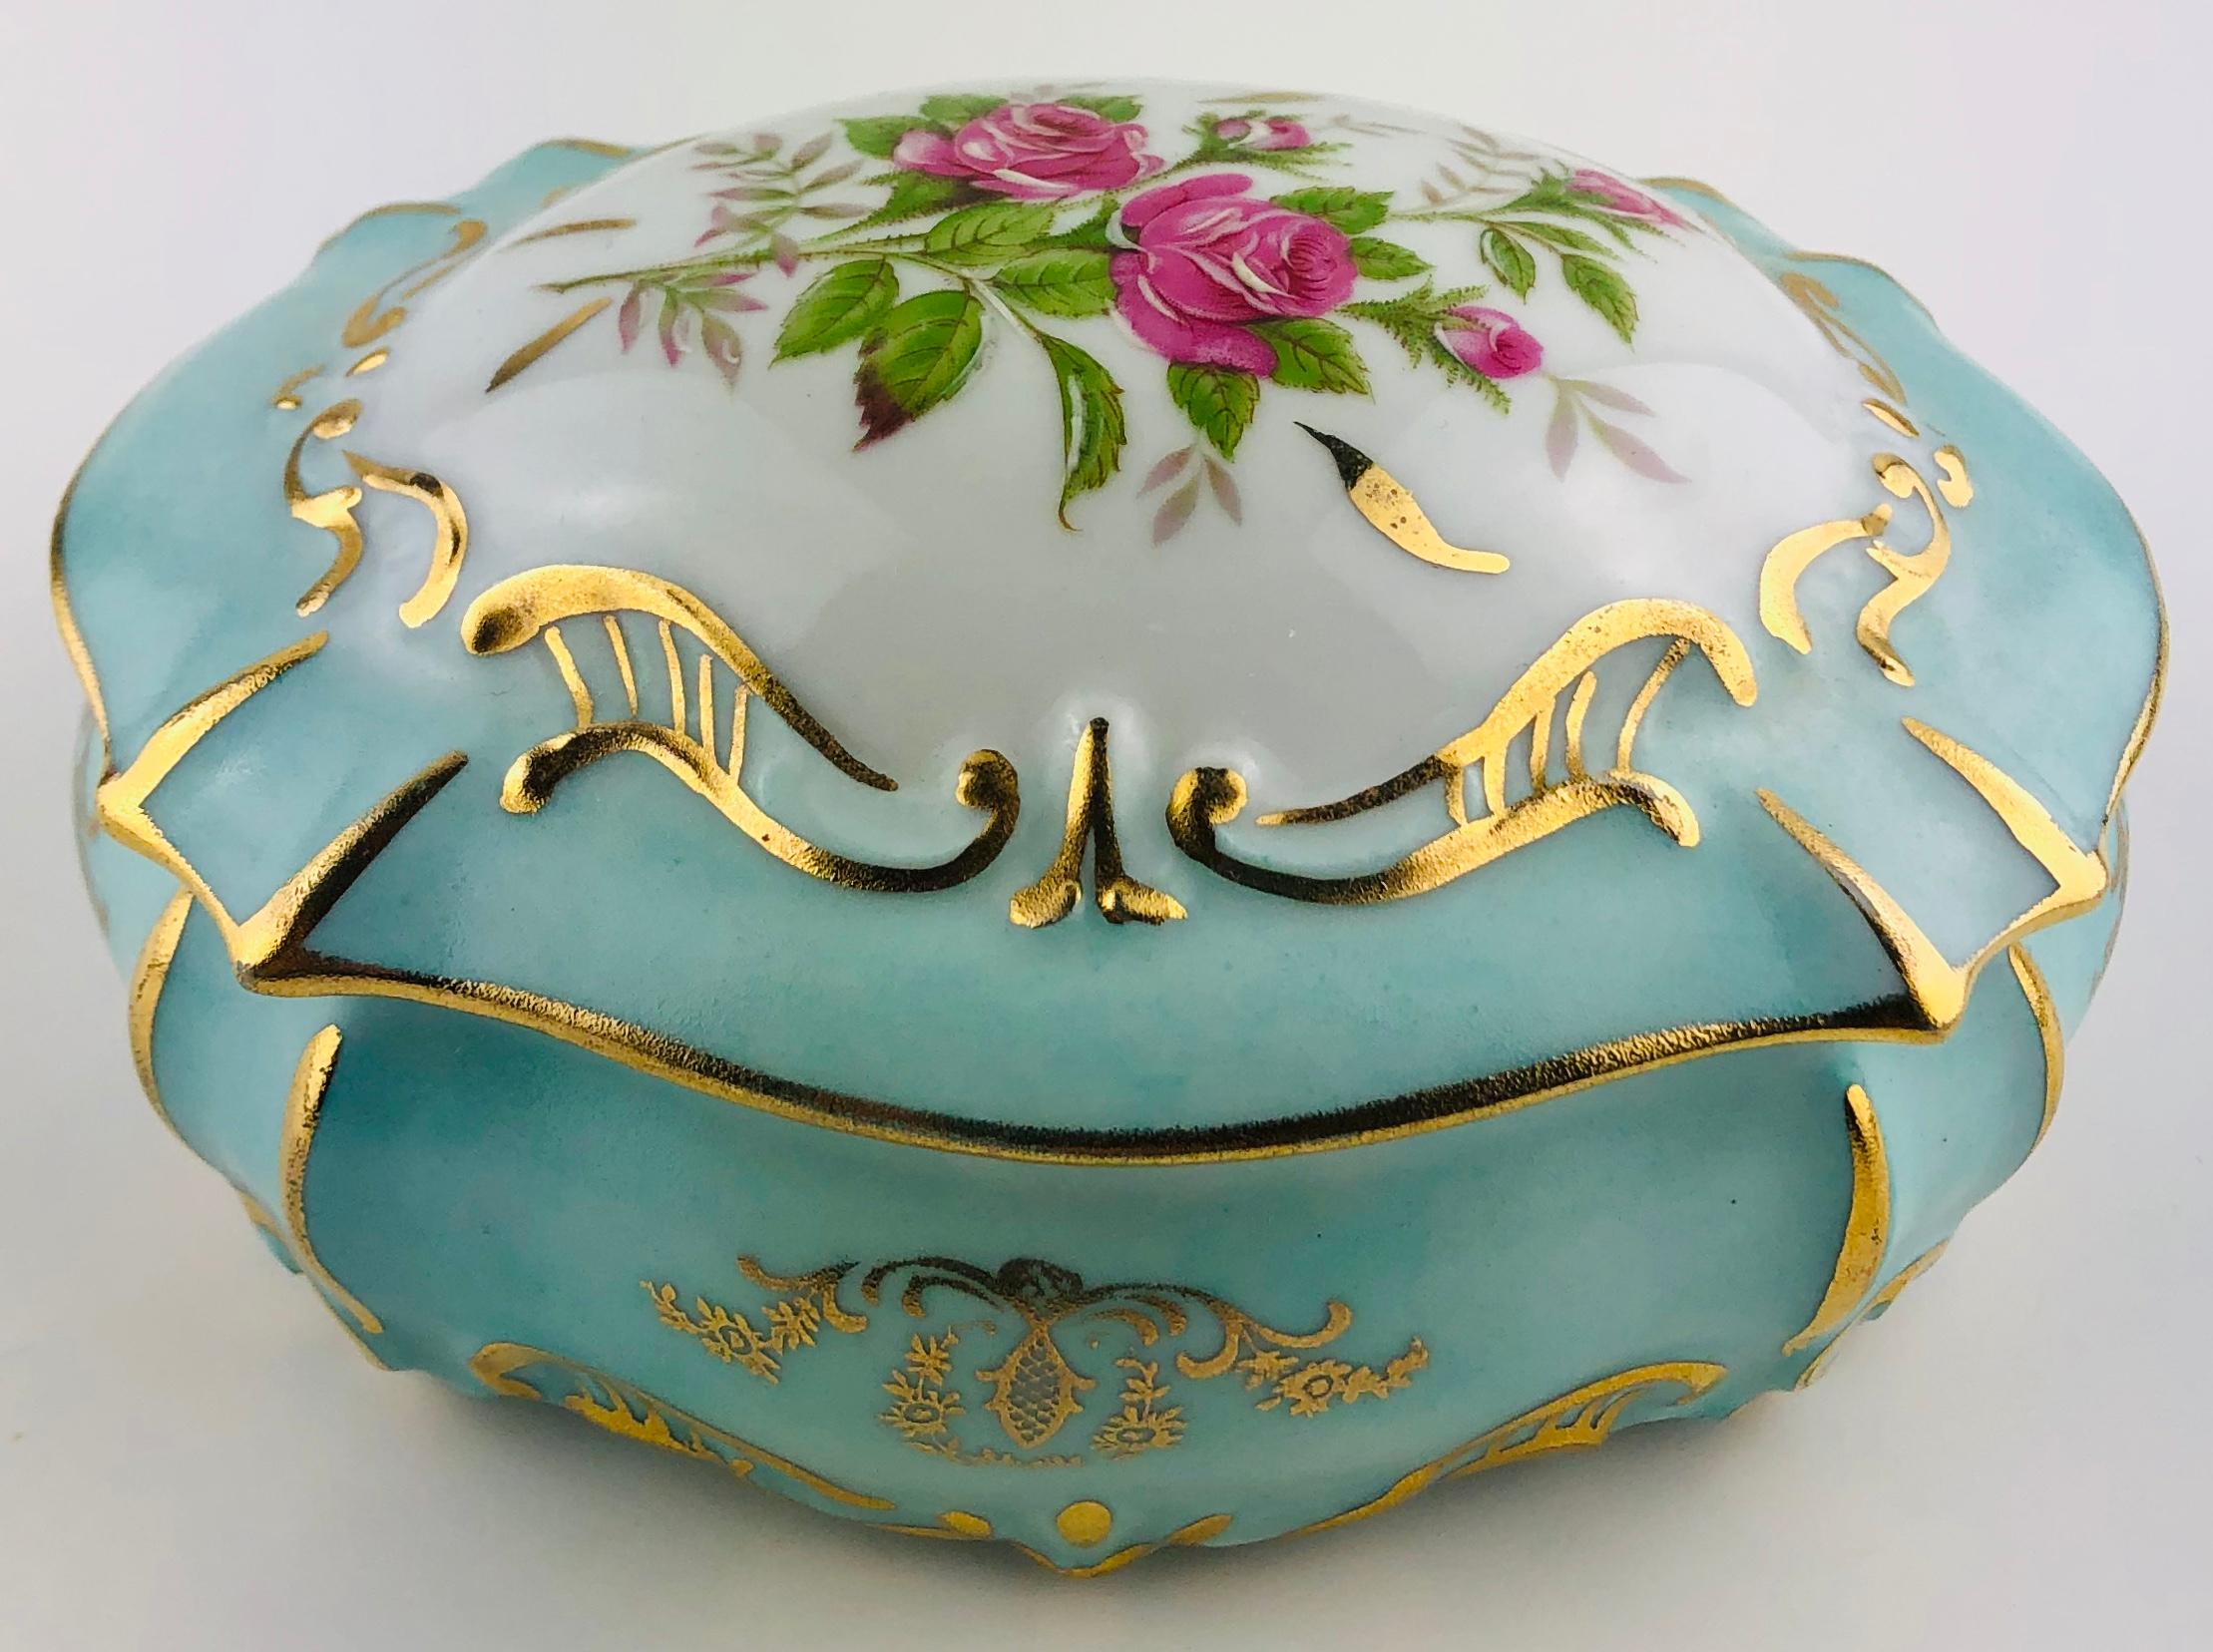 A truly exquisite French Limoges handcrafted and hand painted gold trimmed trinket /jewelry box or candy dish, circa 1930. 
Bears the Limoges stamp.
Glazed.

Measures: 5 7/8